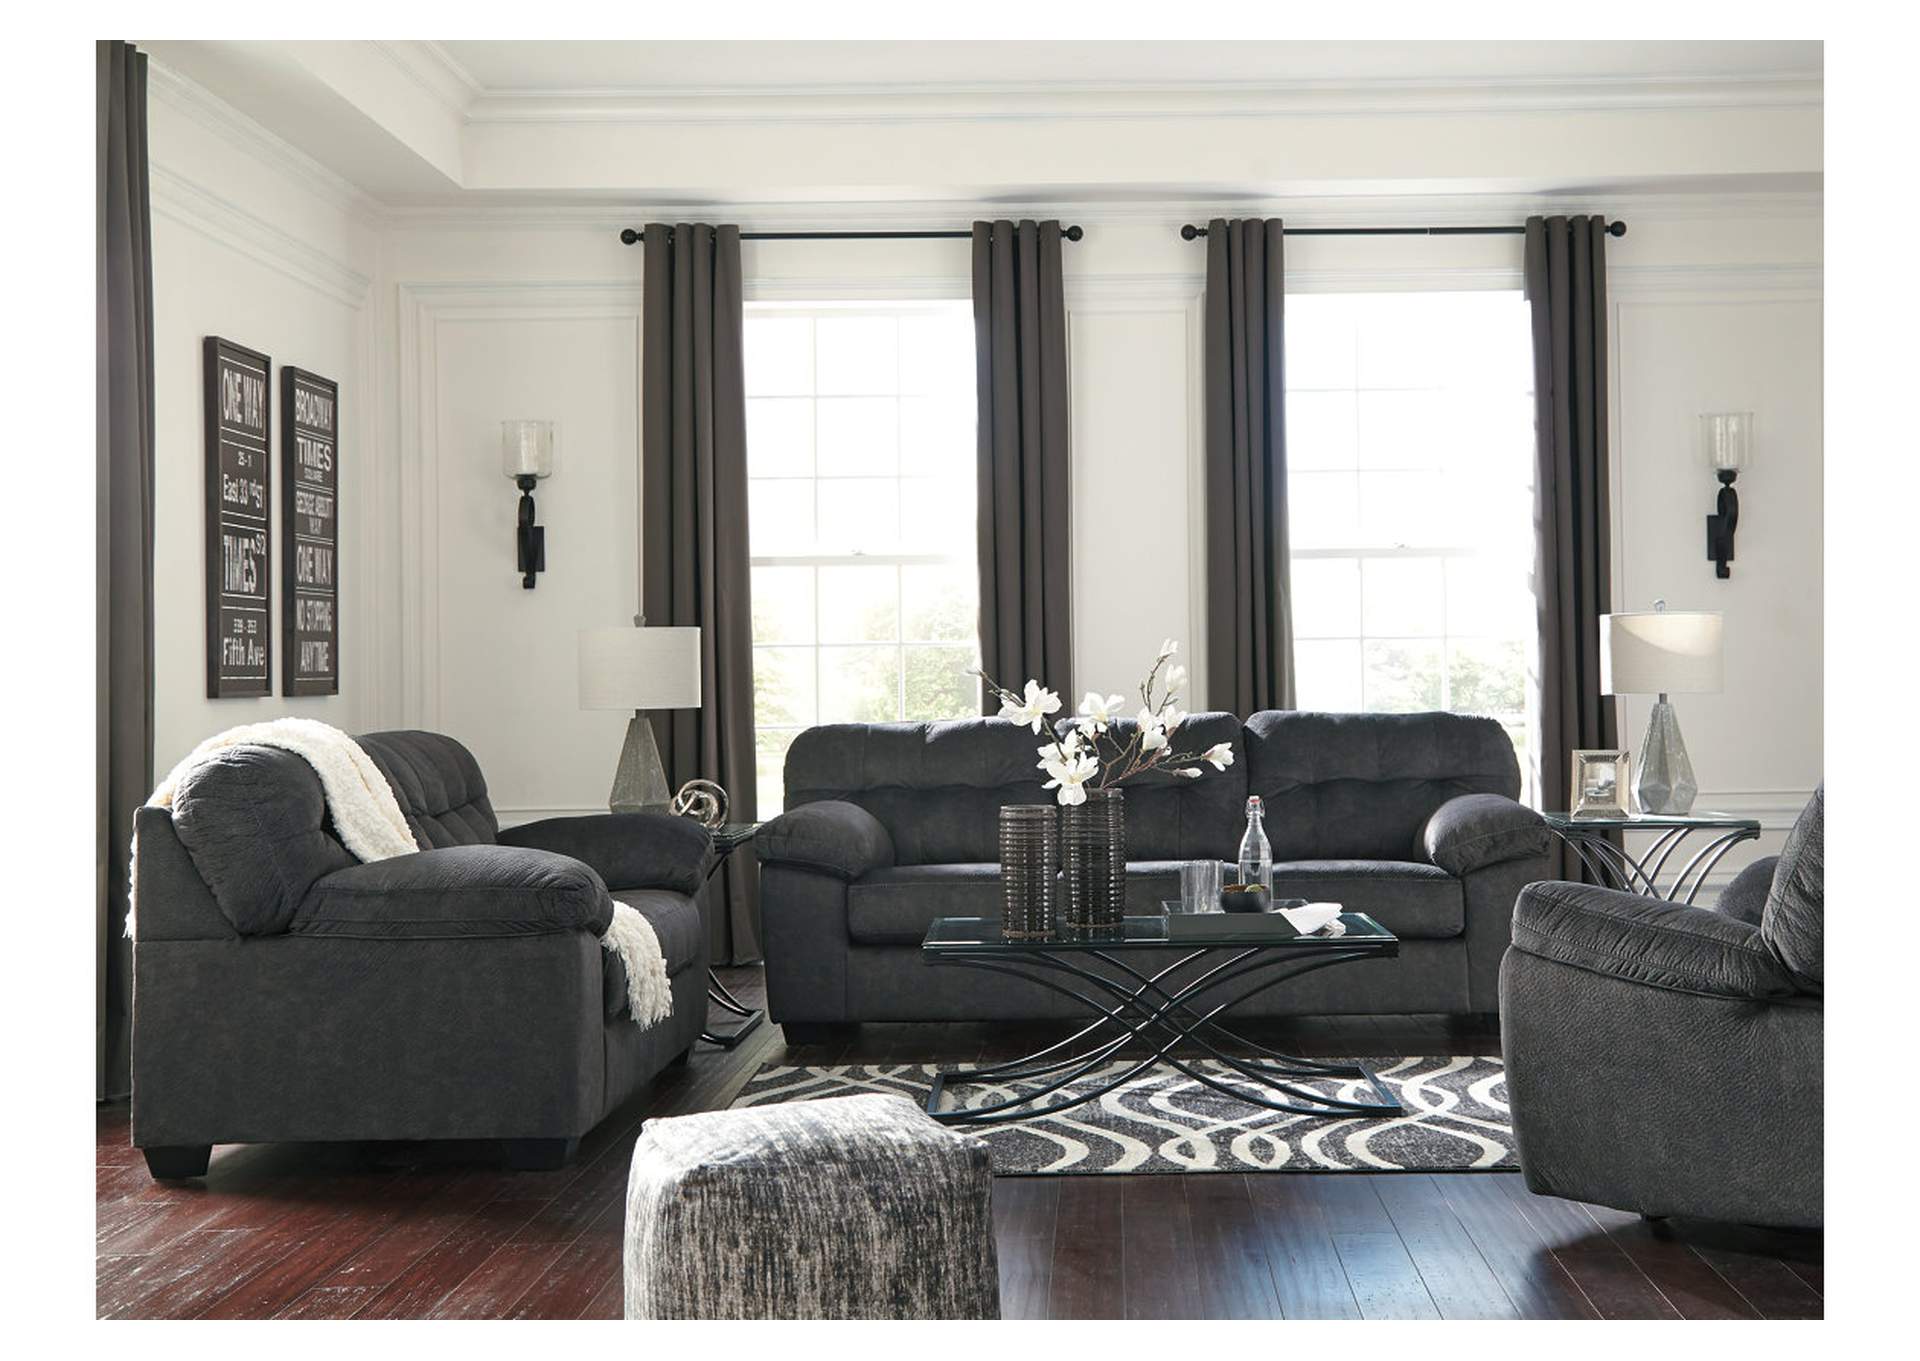 Accrington Sofa, Loveseat and Recliner,Signature Design By Ashley